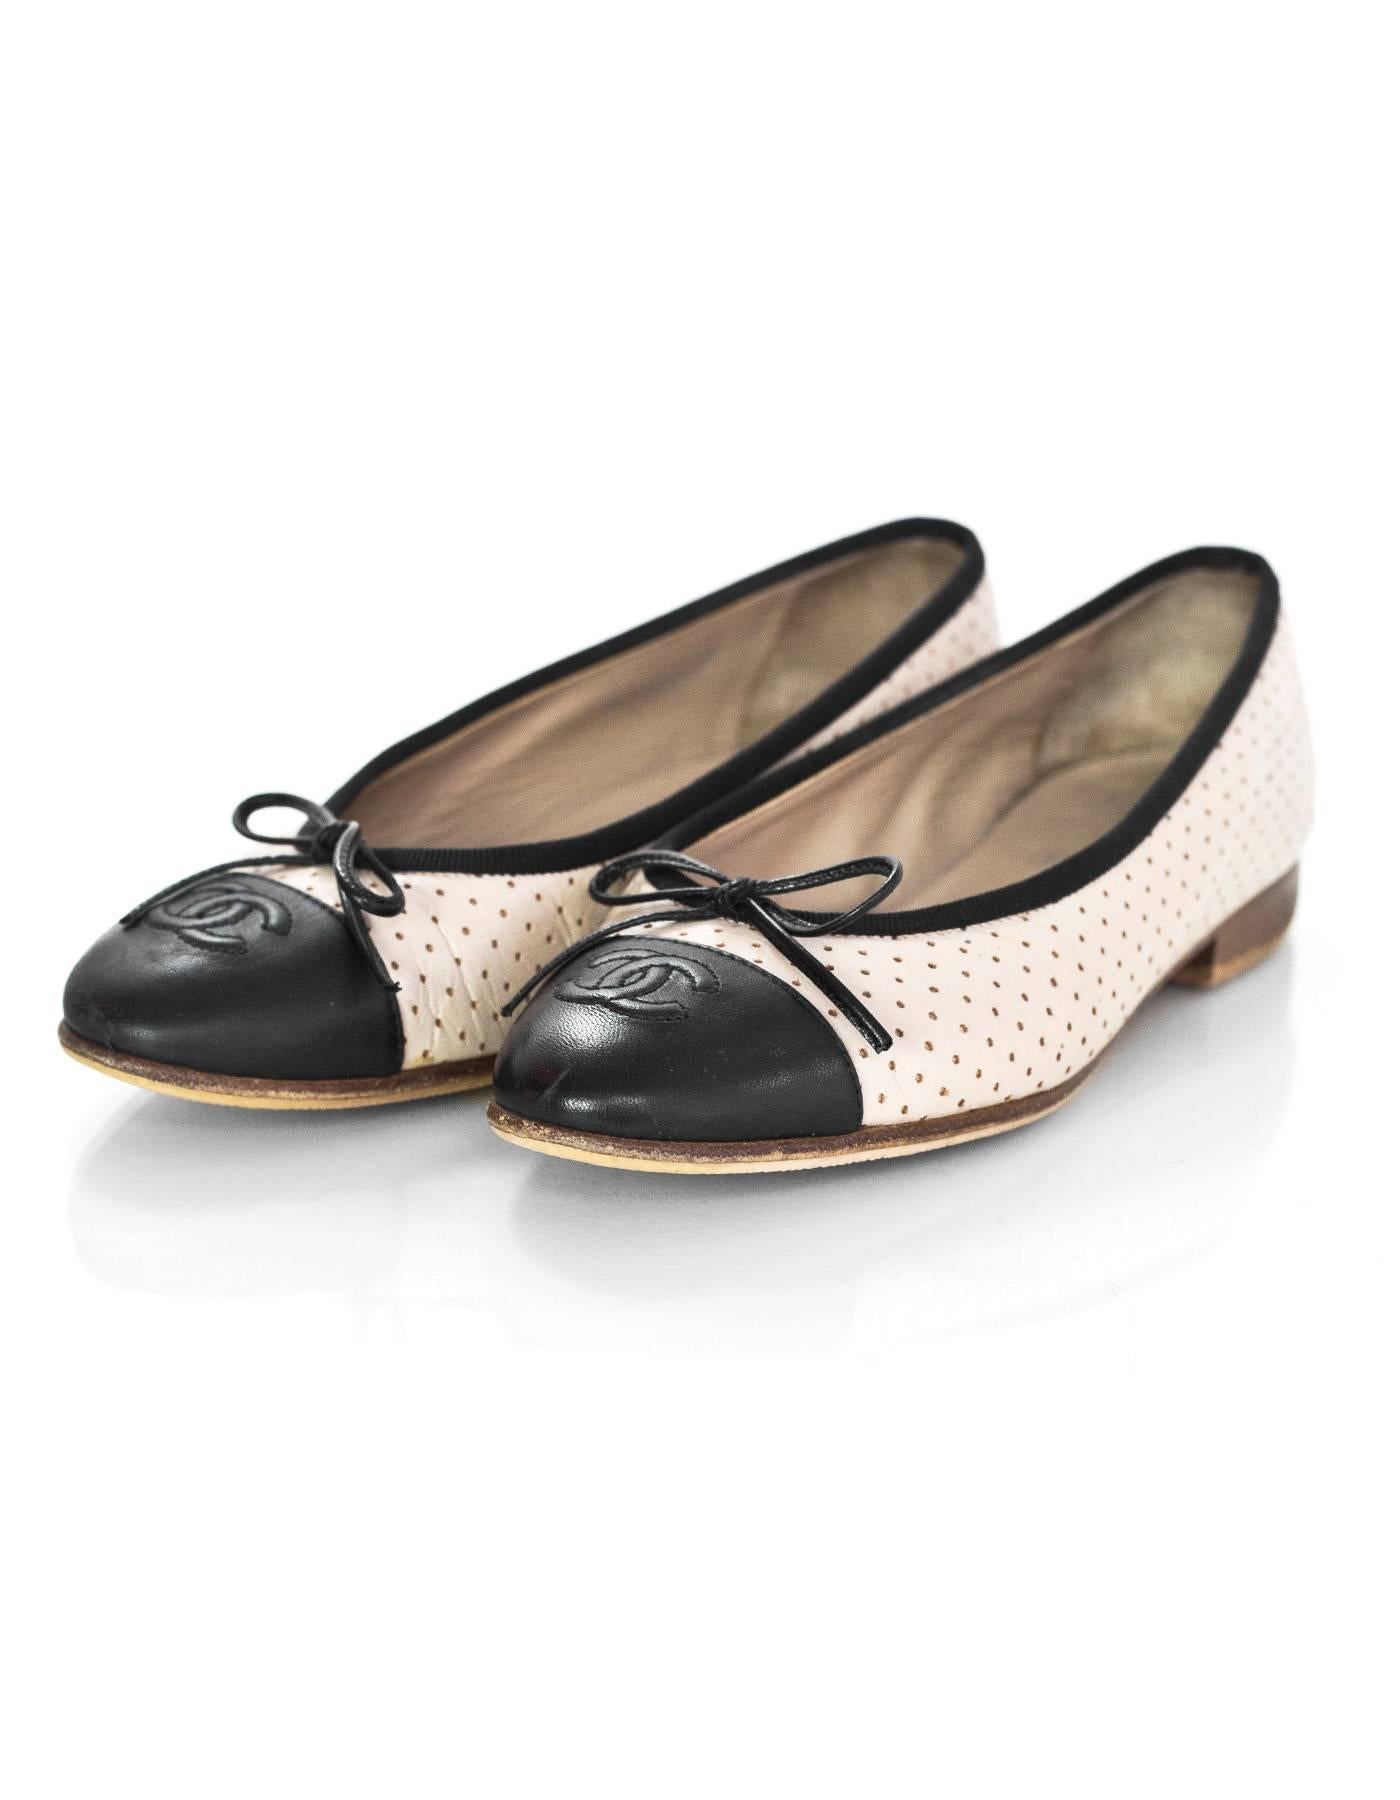 Chanel Beige & Black Perforated Ballet Flats Sz 36

Made In: Italy
Color: Beige, black
Materials: Leather
Closure/Opening: Slide on
Sole Stamp: CC Made in Italy 36
Current Retail: $750+ tax
Overall Condition: Very good pre-owned condition with